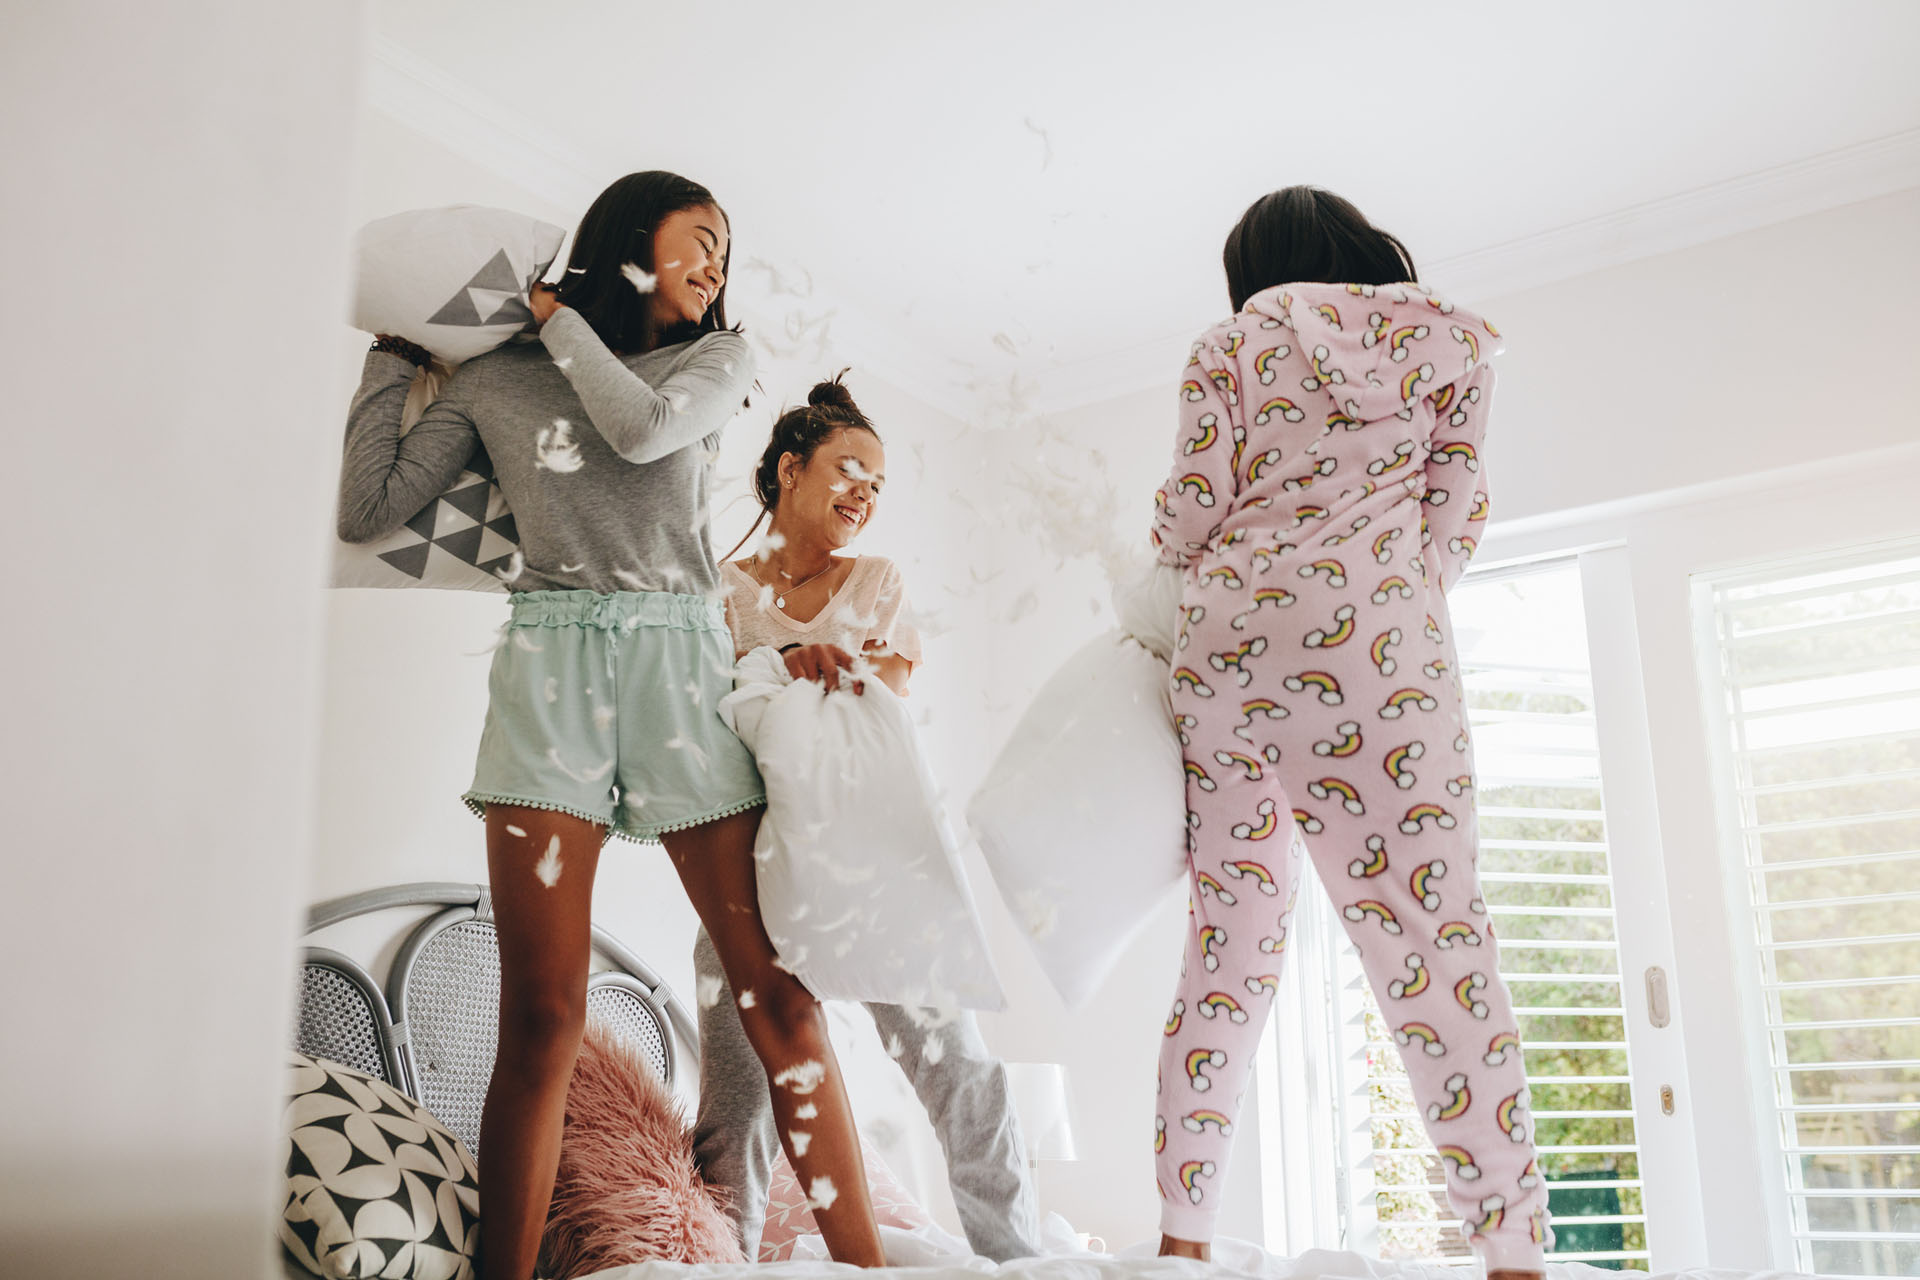 Girls pillow fighting standing on bed